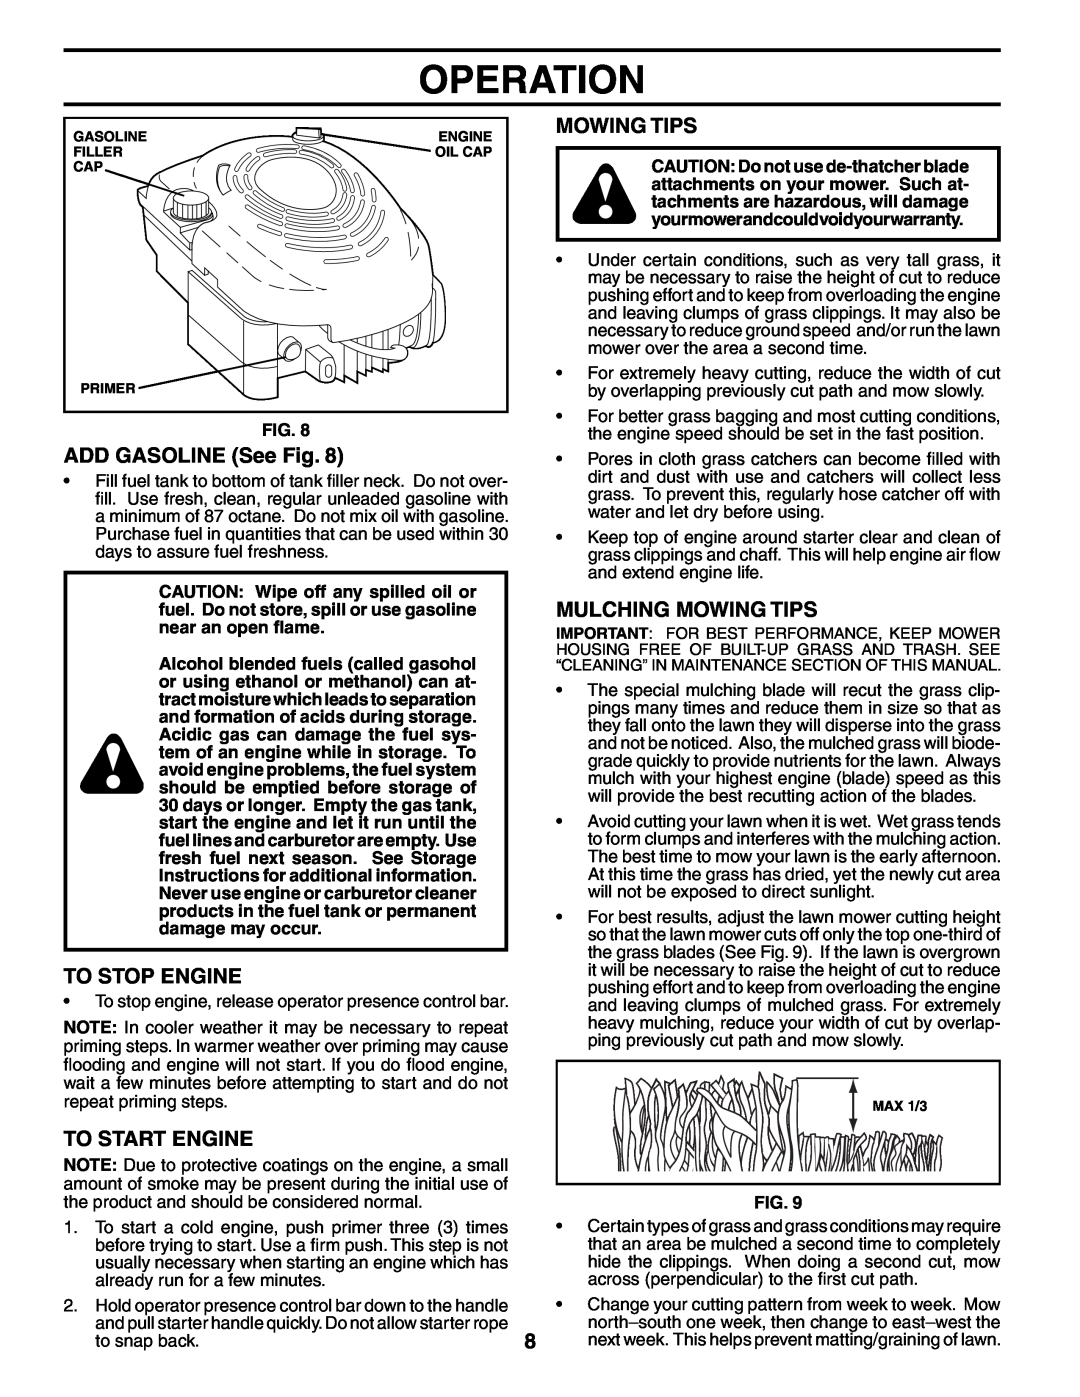 Husqvarna 6522SH owner manual ADD GASOLINE See Fig, To Stop Engine, To Start Engine, Mulching Mowing Tips, Operation 